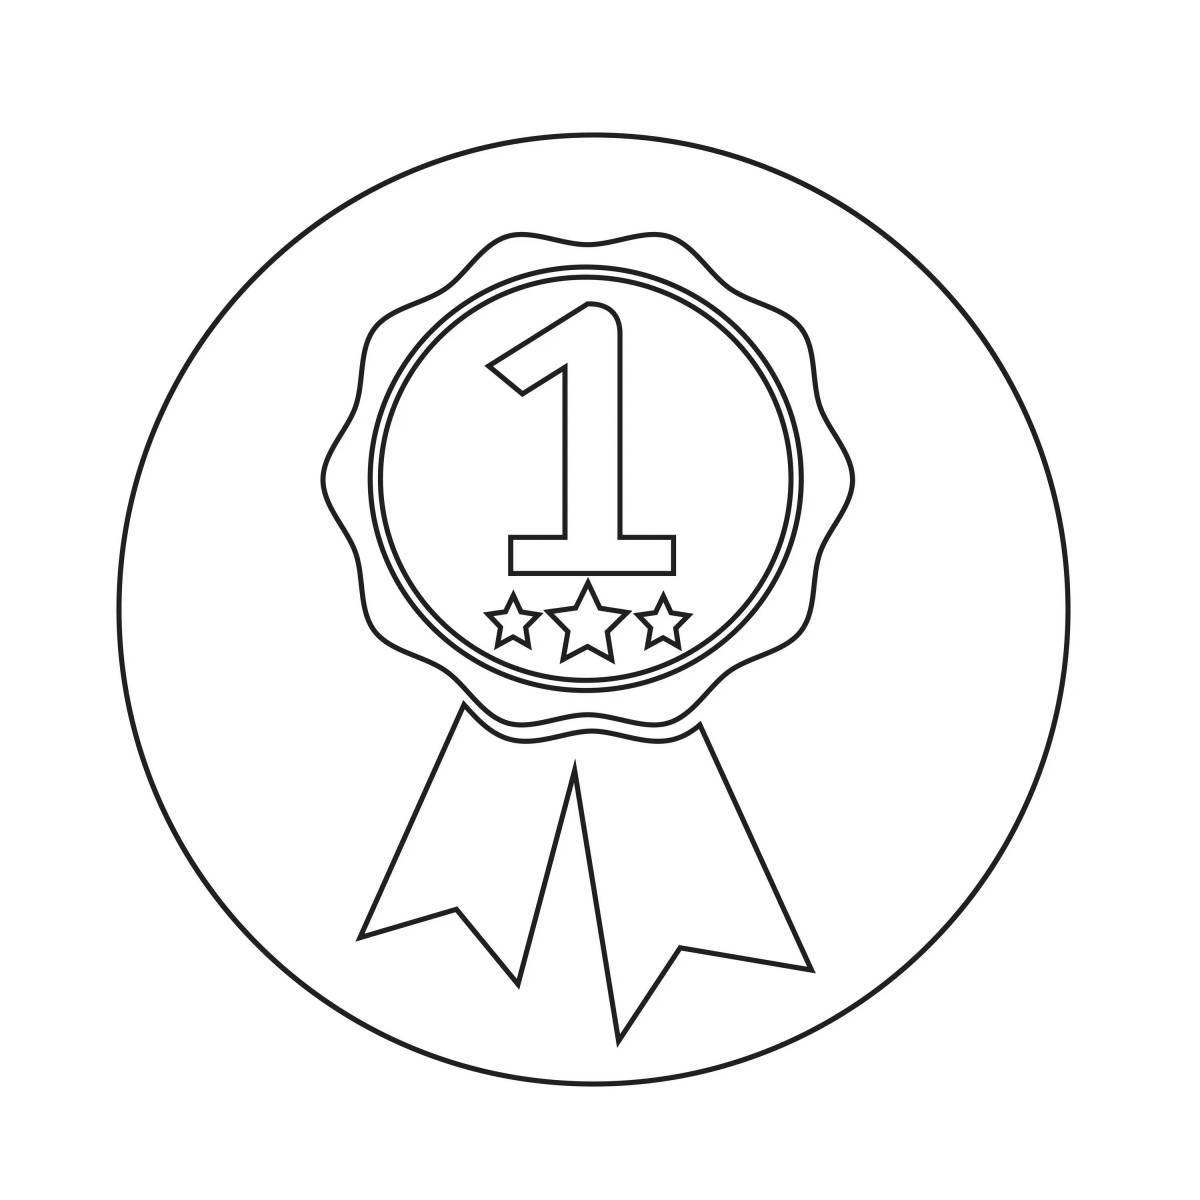 Glittering medal coloring page